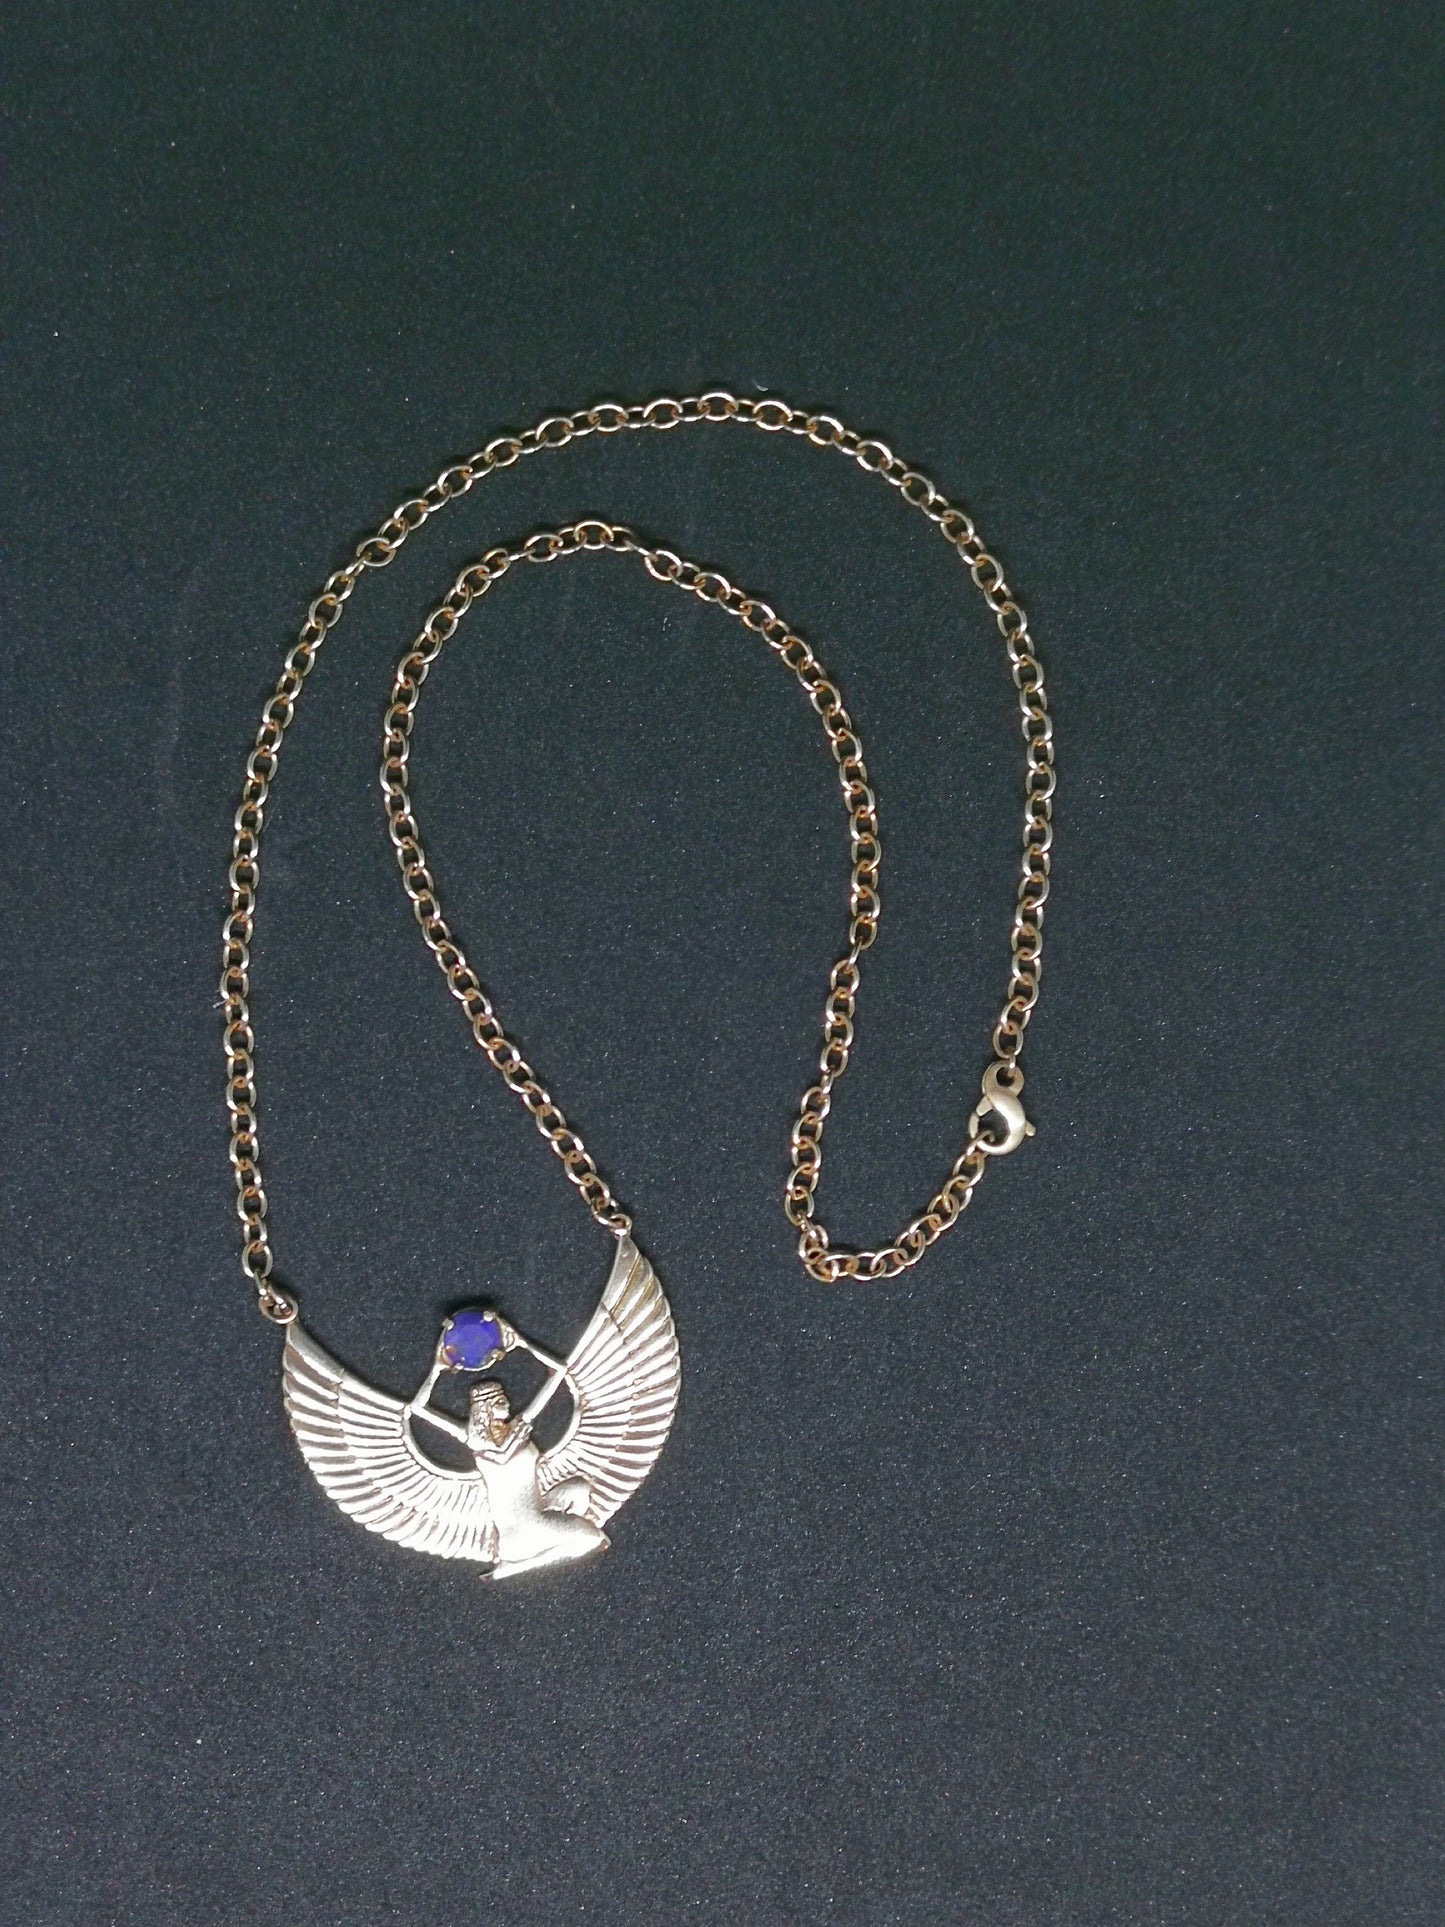 Winged Isis Necklace with Lapis Lazuli in Antique Bronze